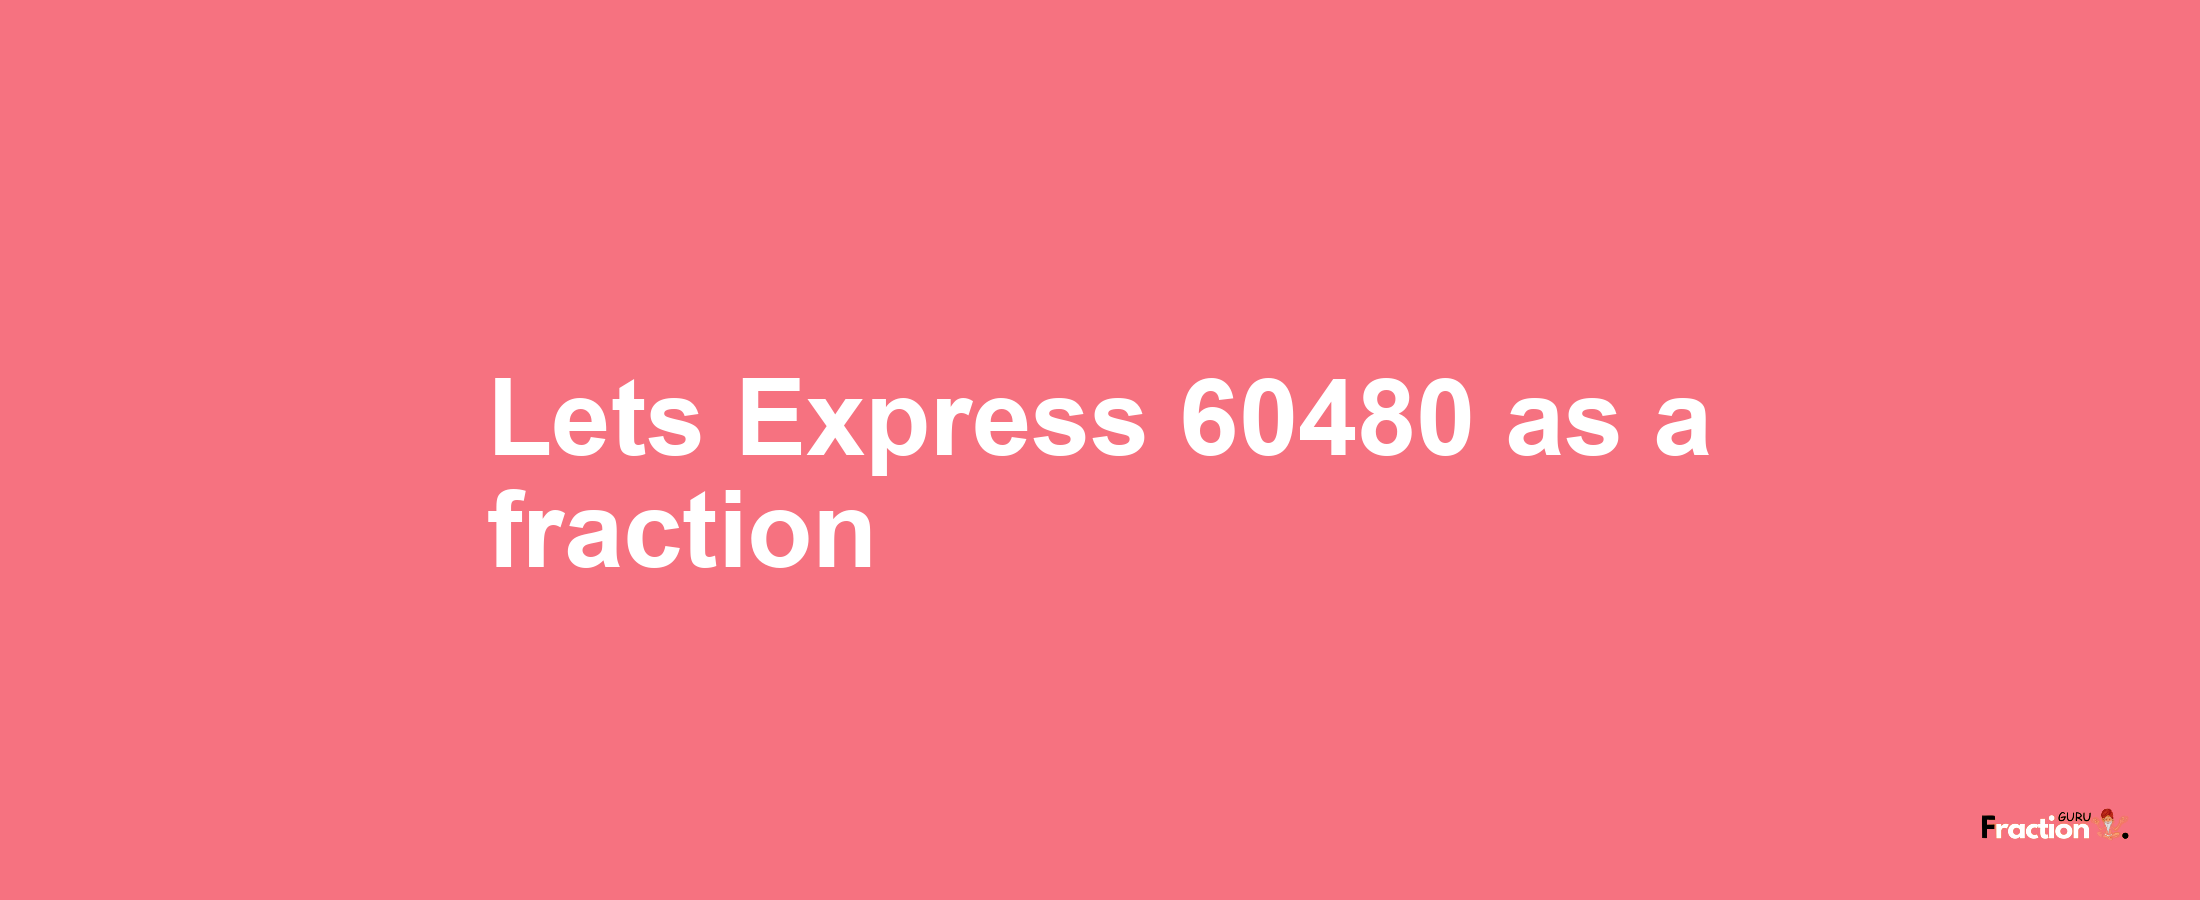 Lets Express 60480 as afraction